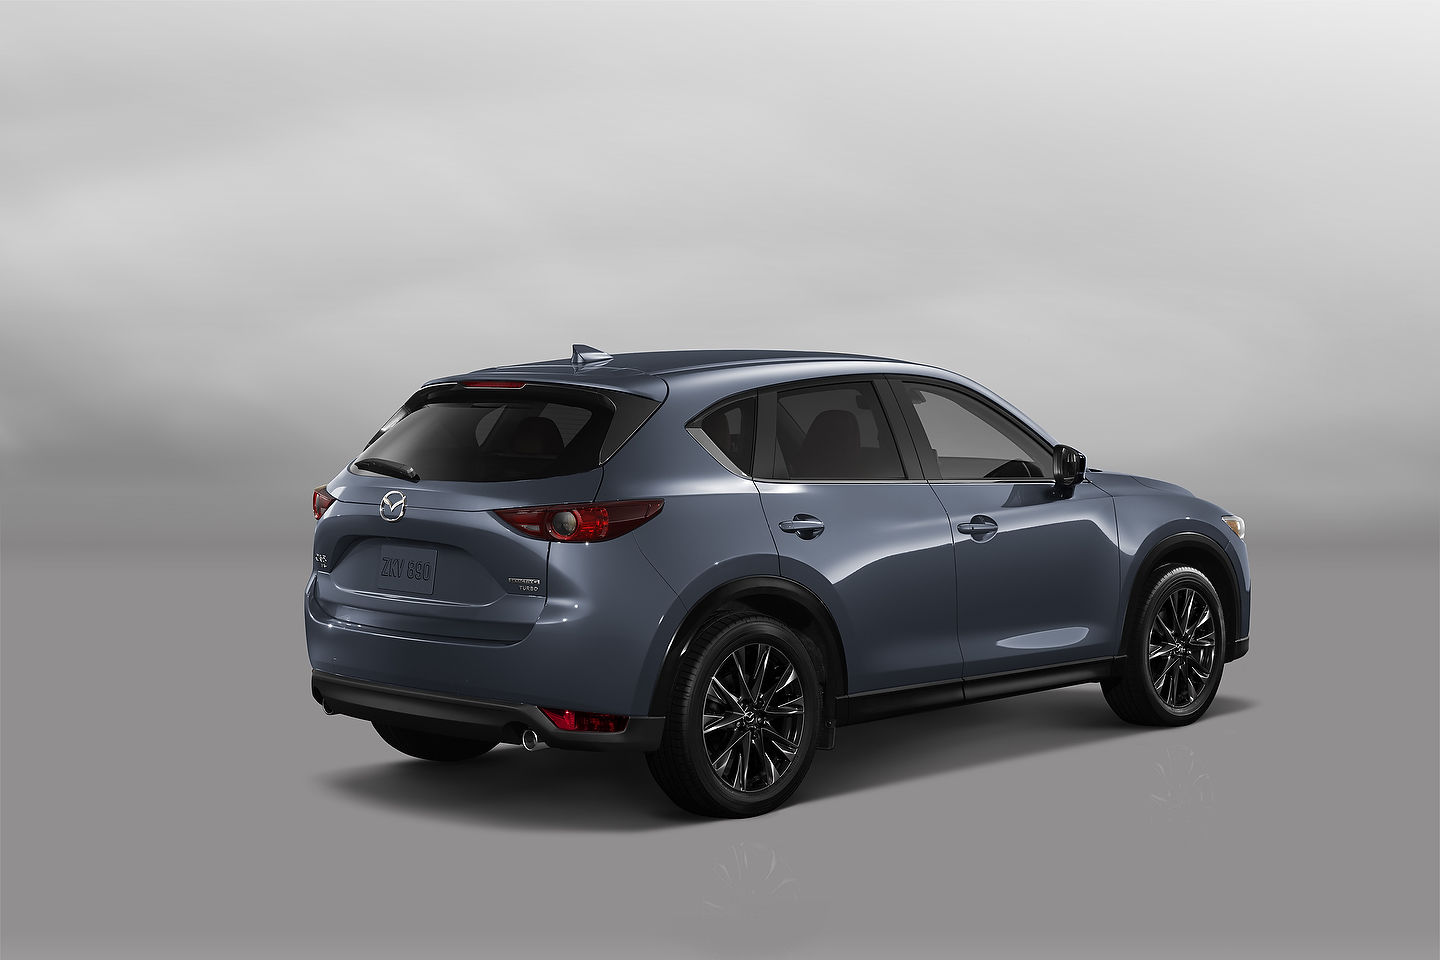 2021.5 Mazda CX-5 Specs, Features, and Price